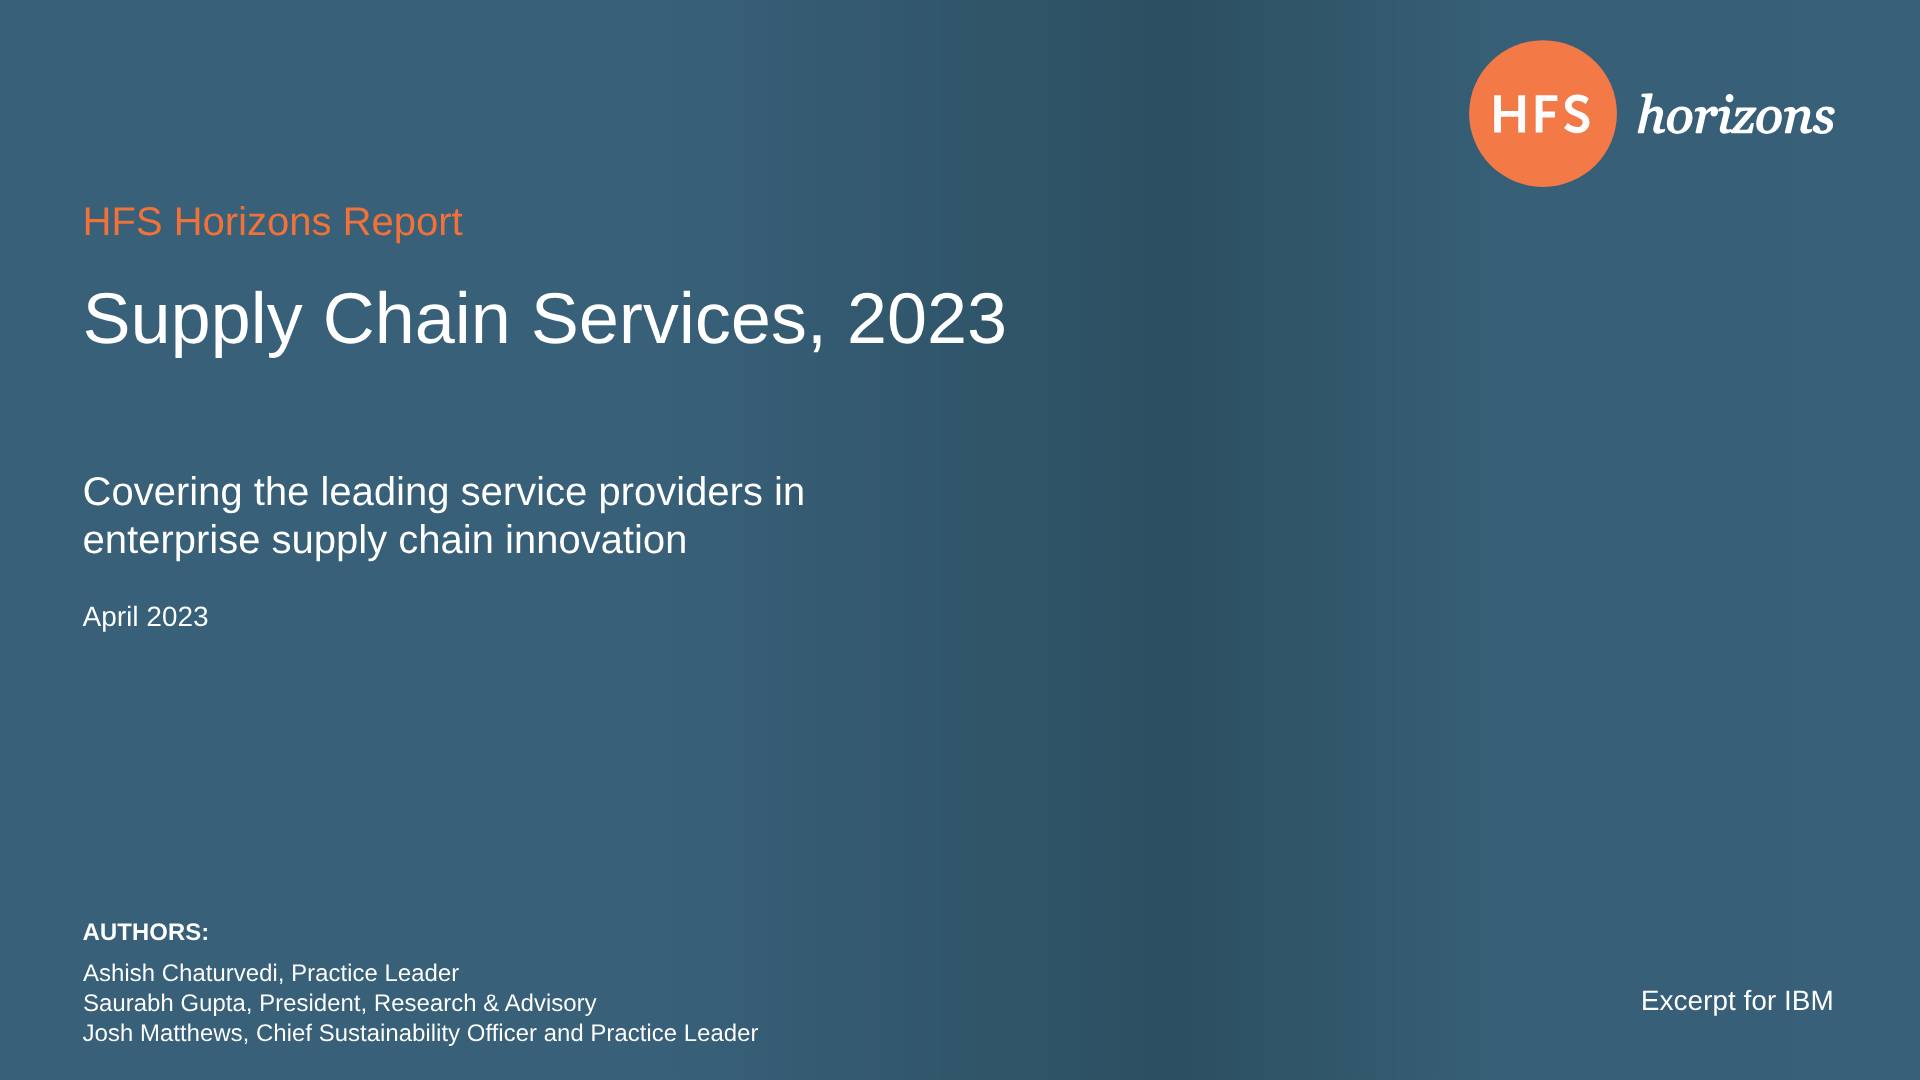 Supply chain services, 2023